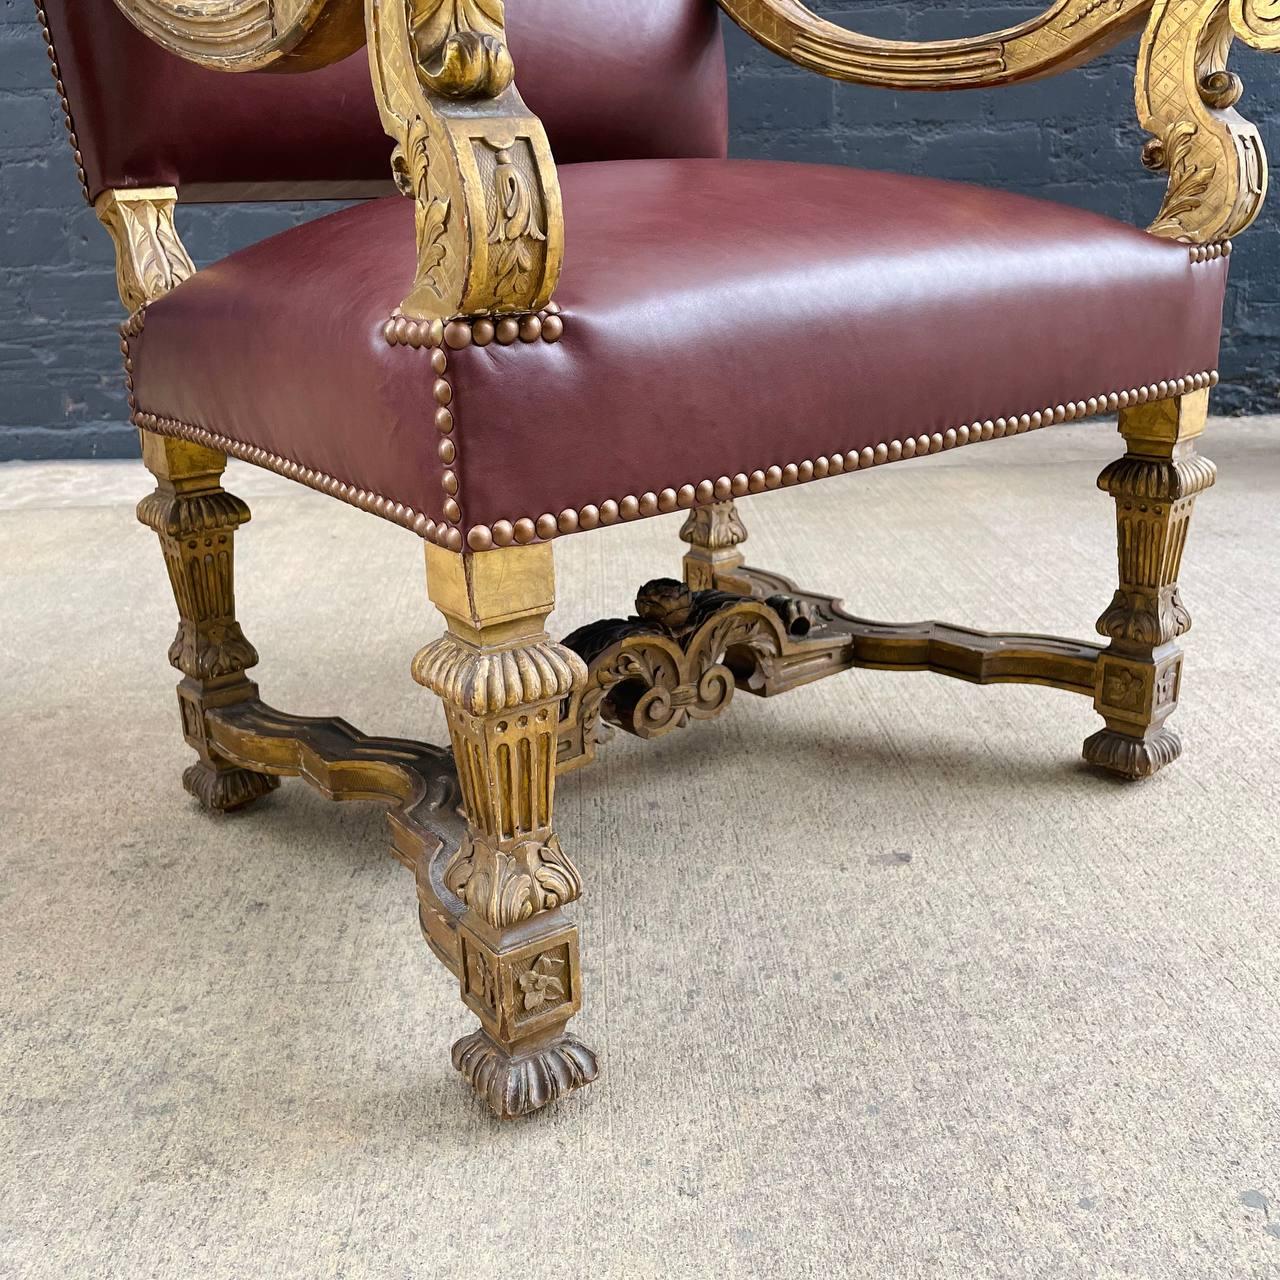 Early 20th Century Antique French Louis XVI Gold-Leaf Gilded Carved Wood & Cognac Leather Armchair For Sale